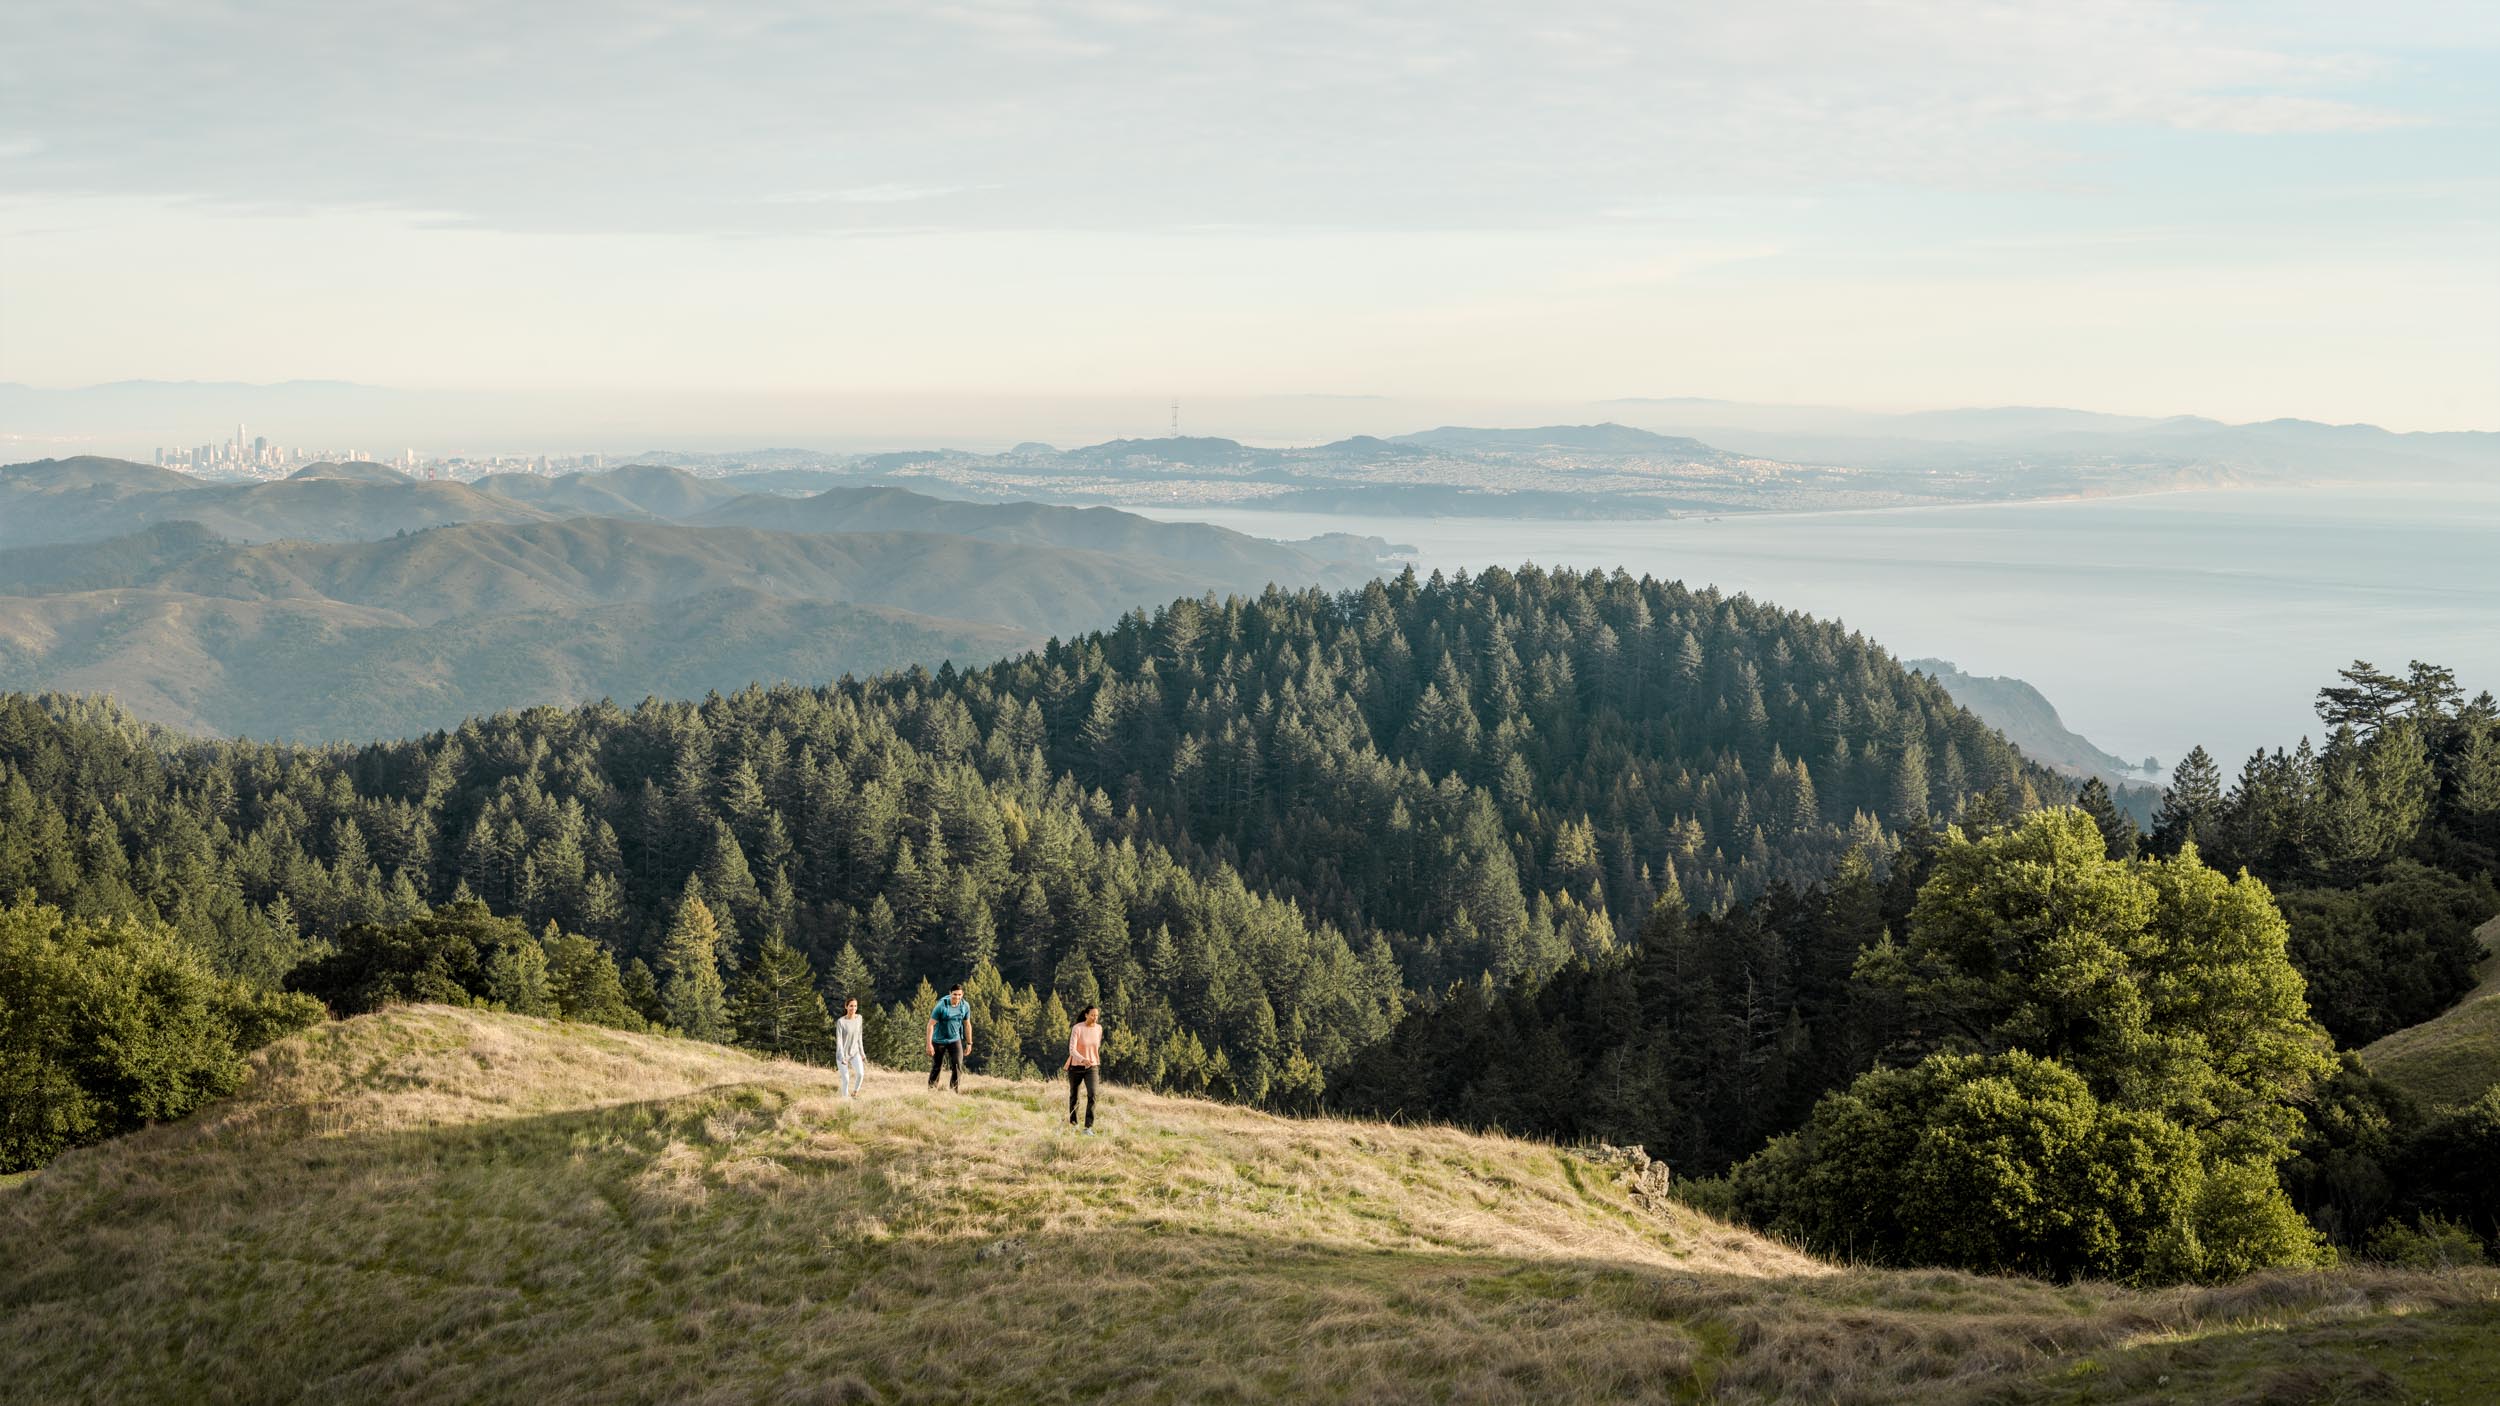 Three hikers walk across a grassy ridge line with a massive view San Francisco and the Pacific Ocean